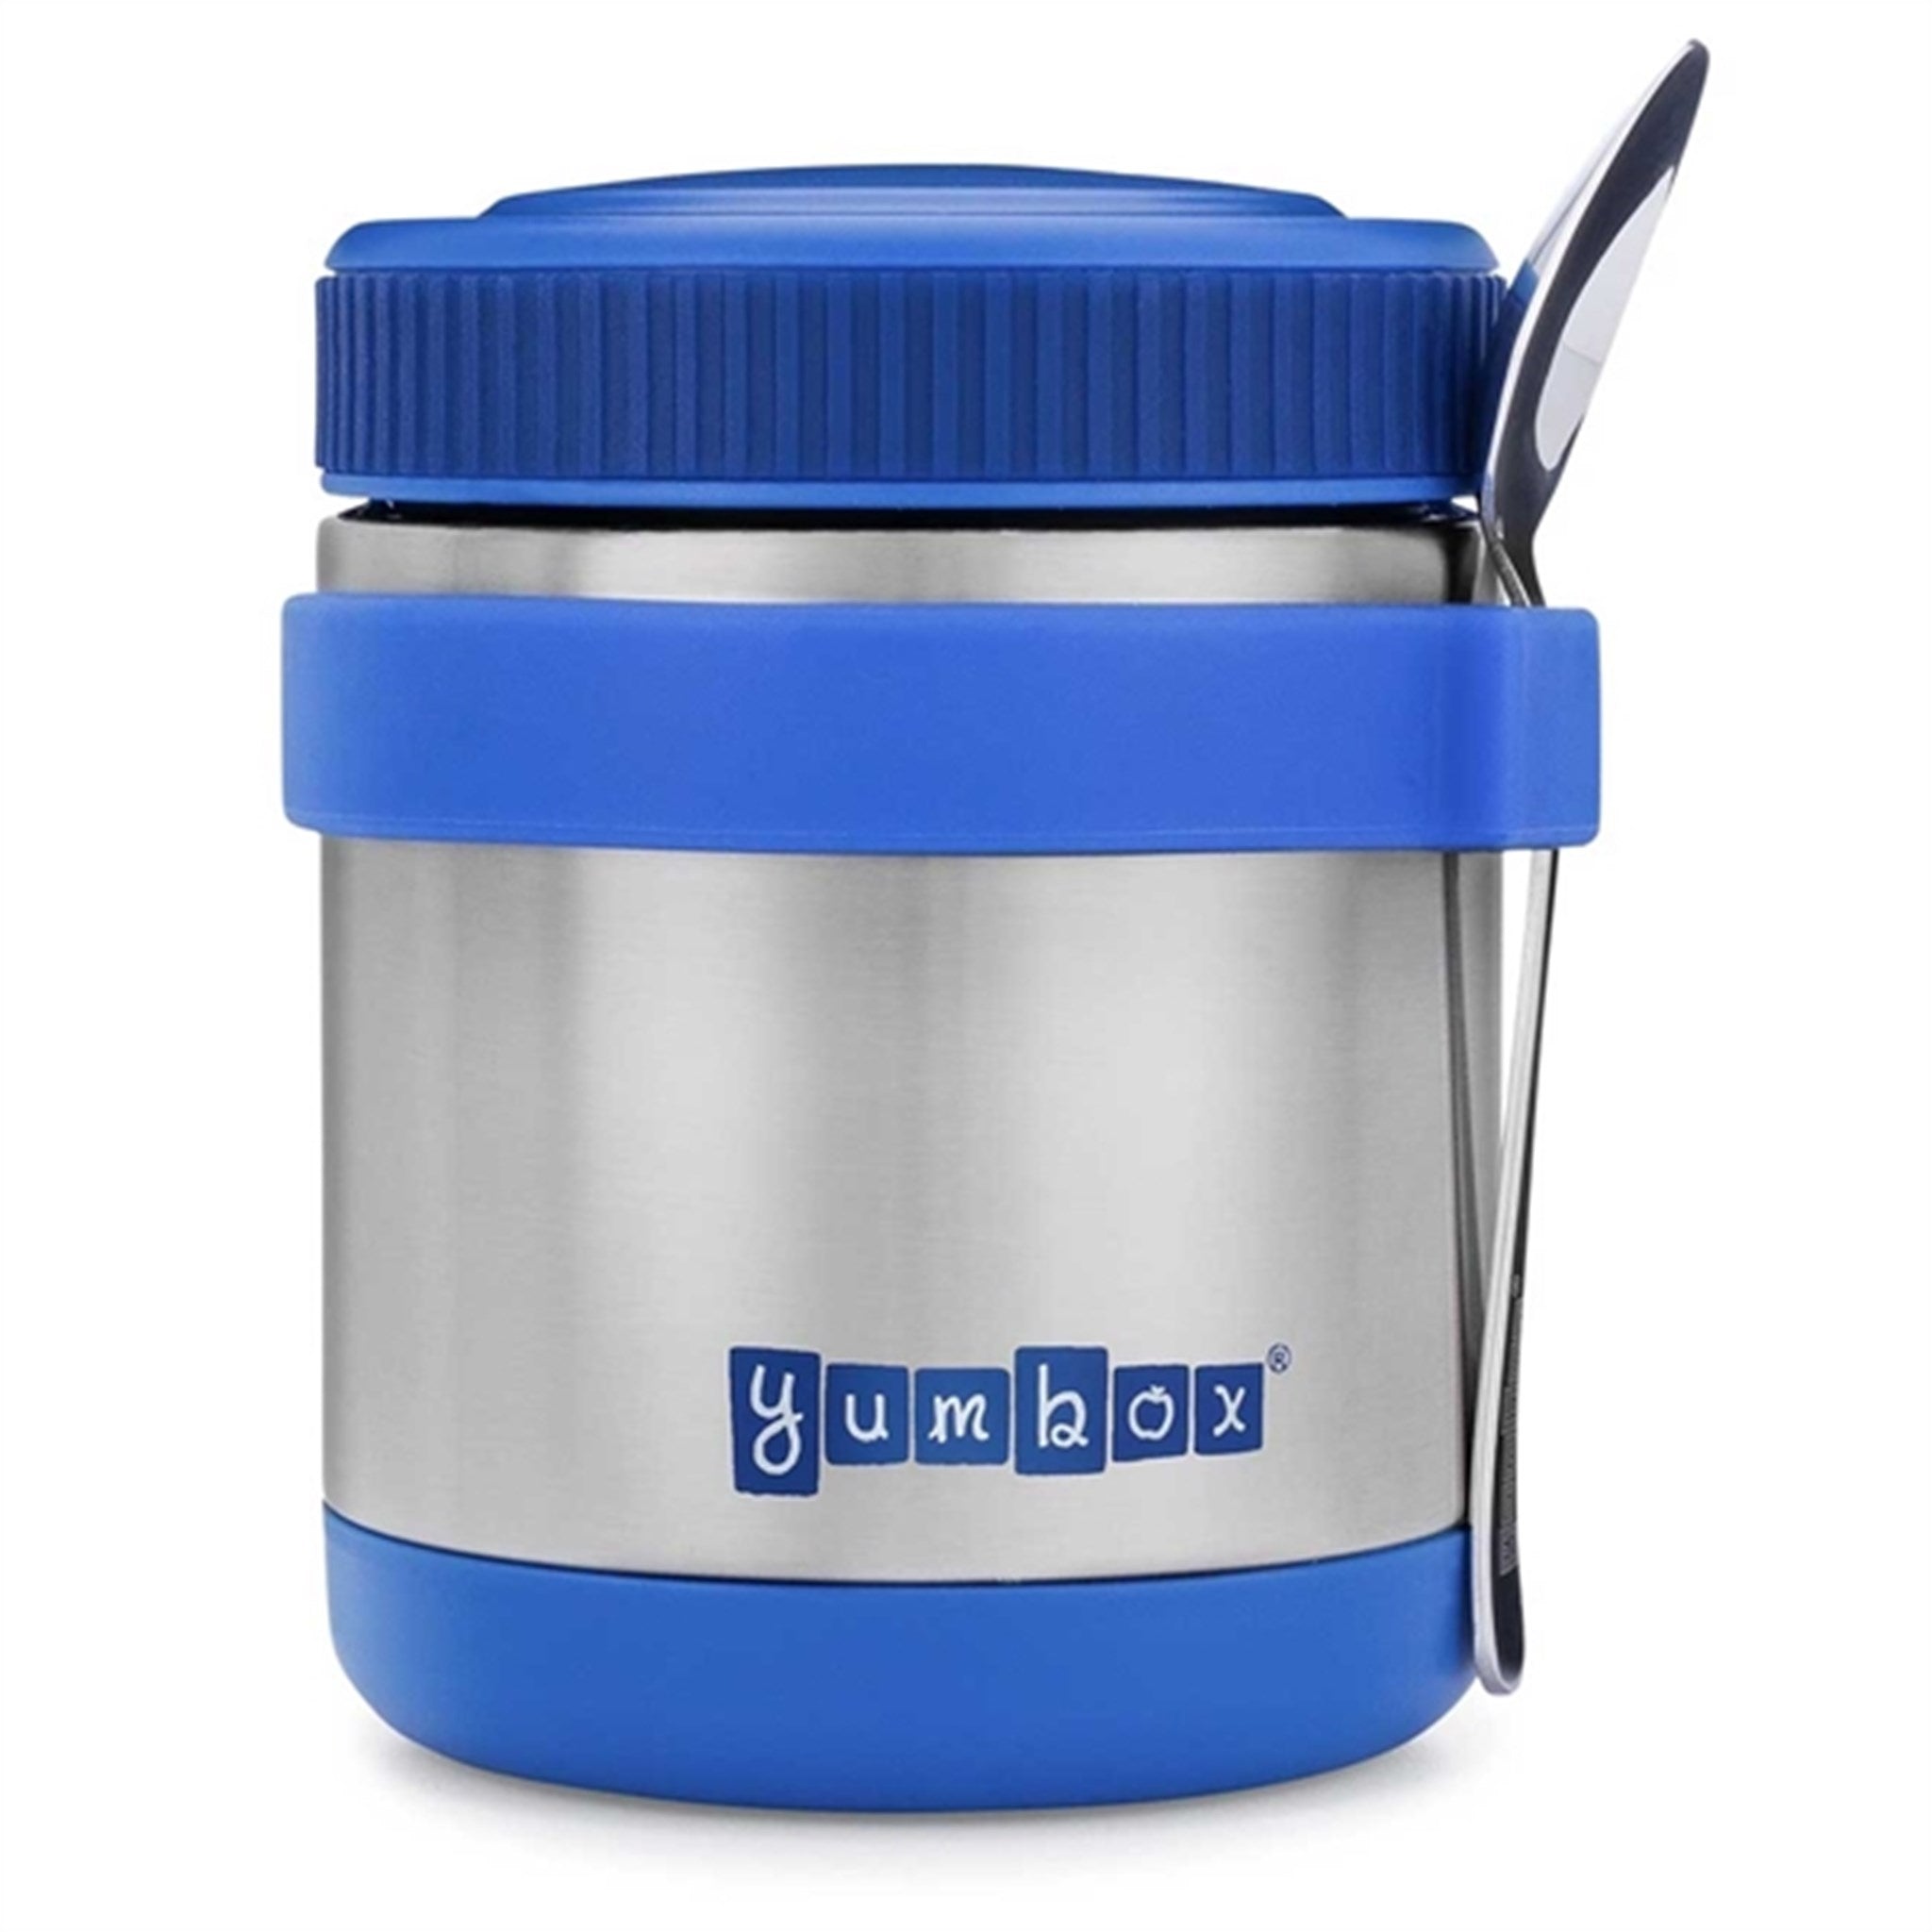 Yumbox Thermal Food Jar For Hot Lunch Zuppa With Spoon And Band Neptune Blue